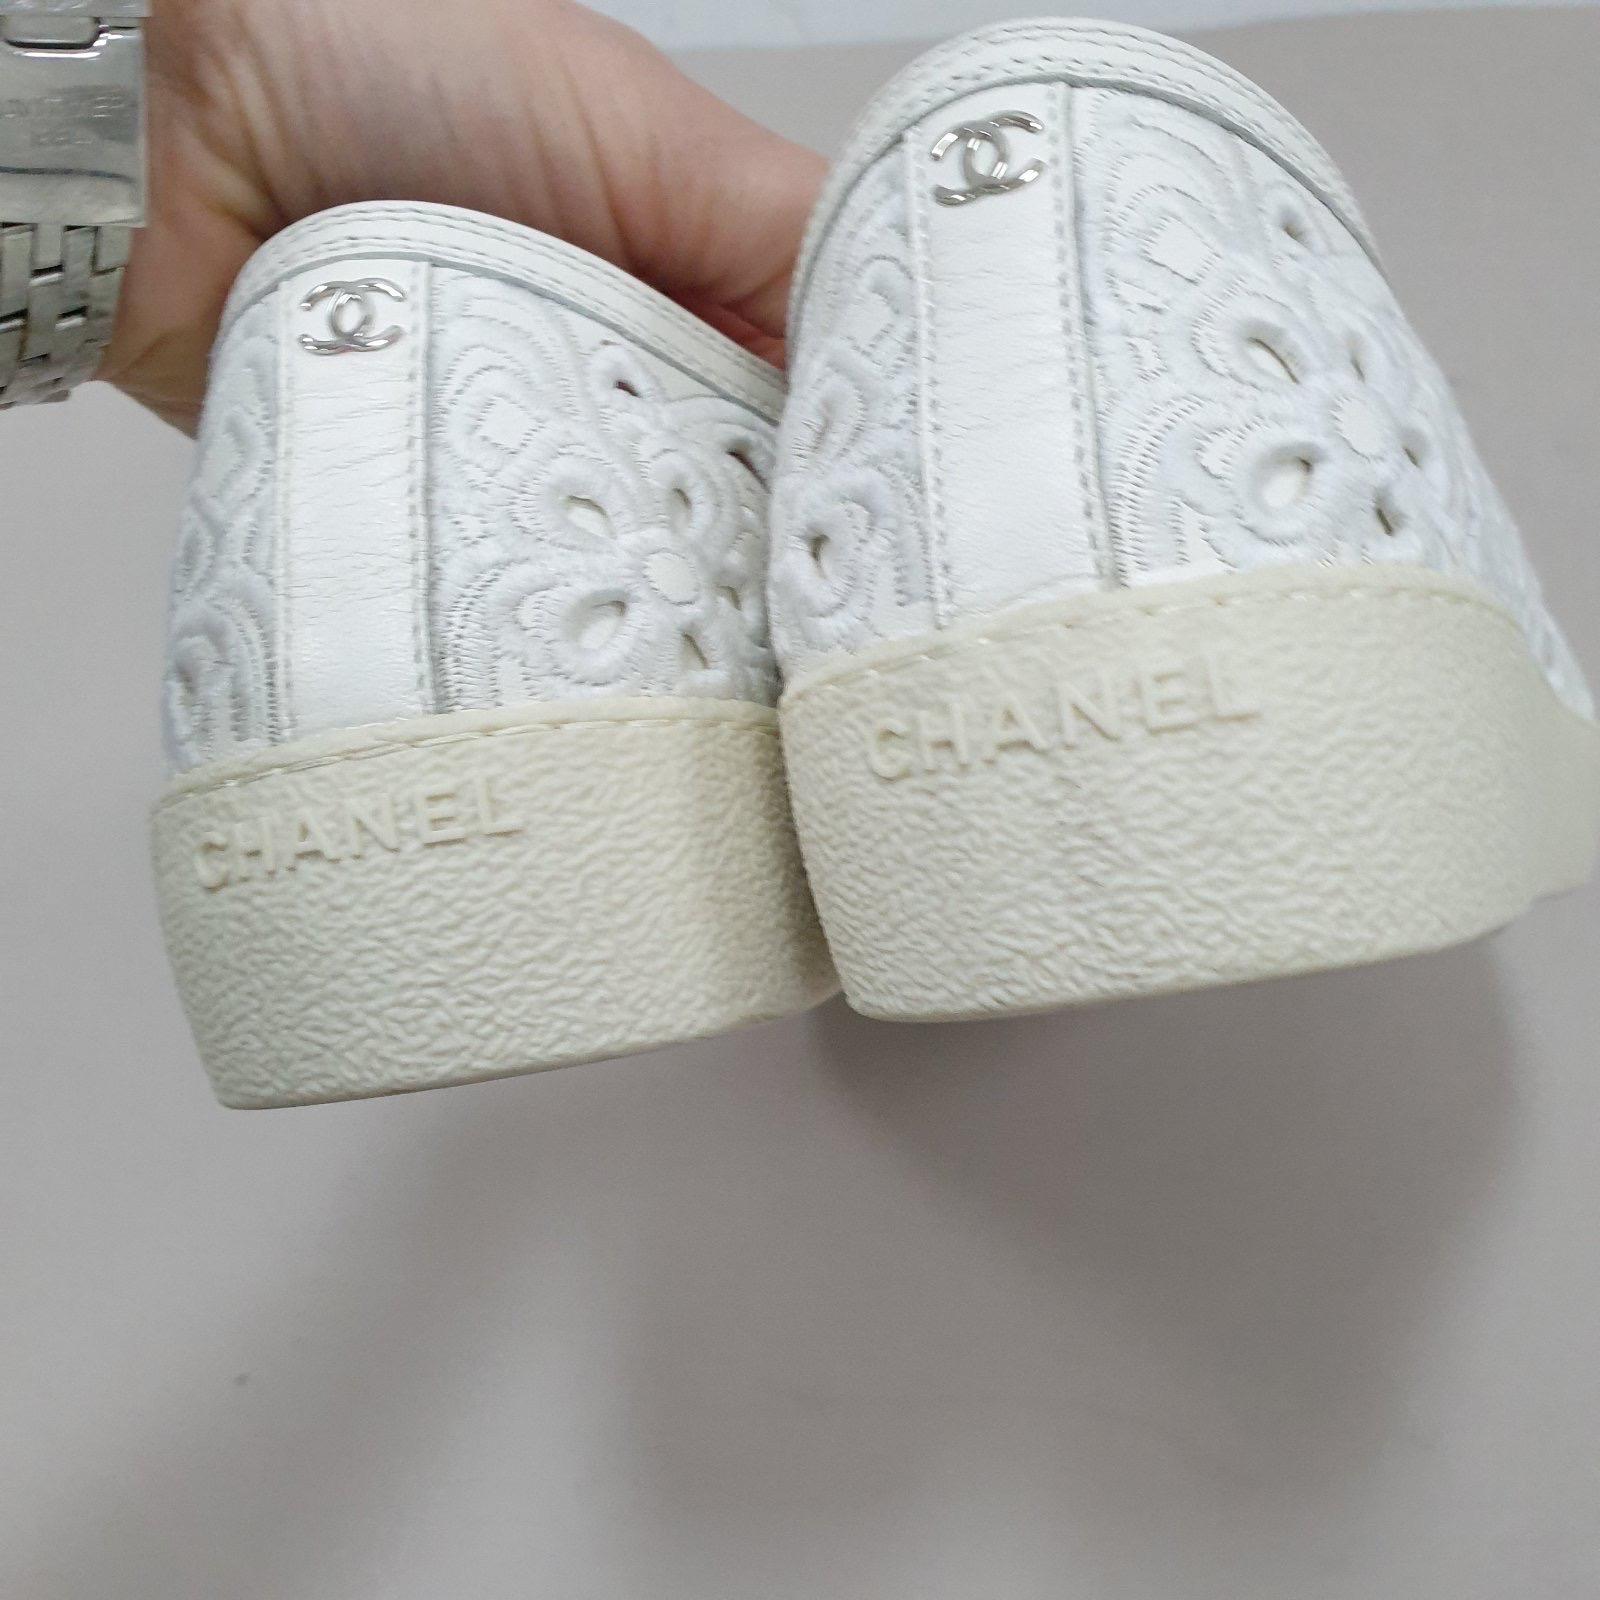 Chanel Camelia Cut Leather Trainers Sneakers   4